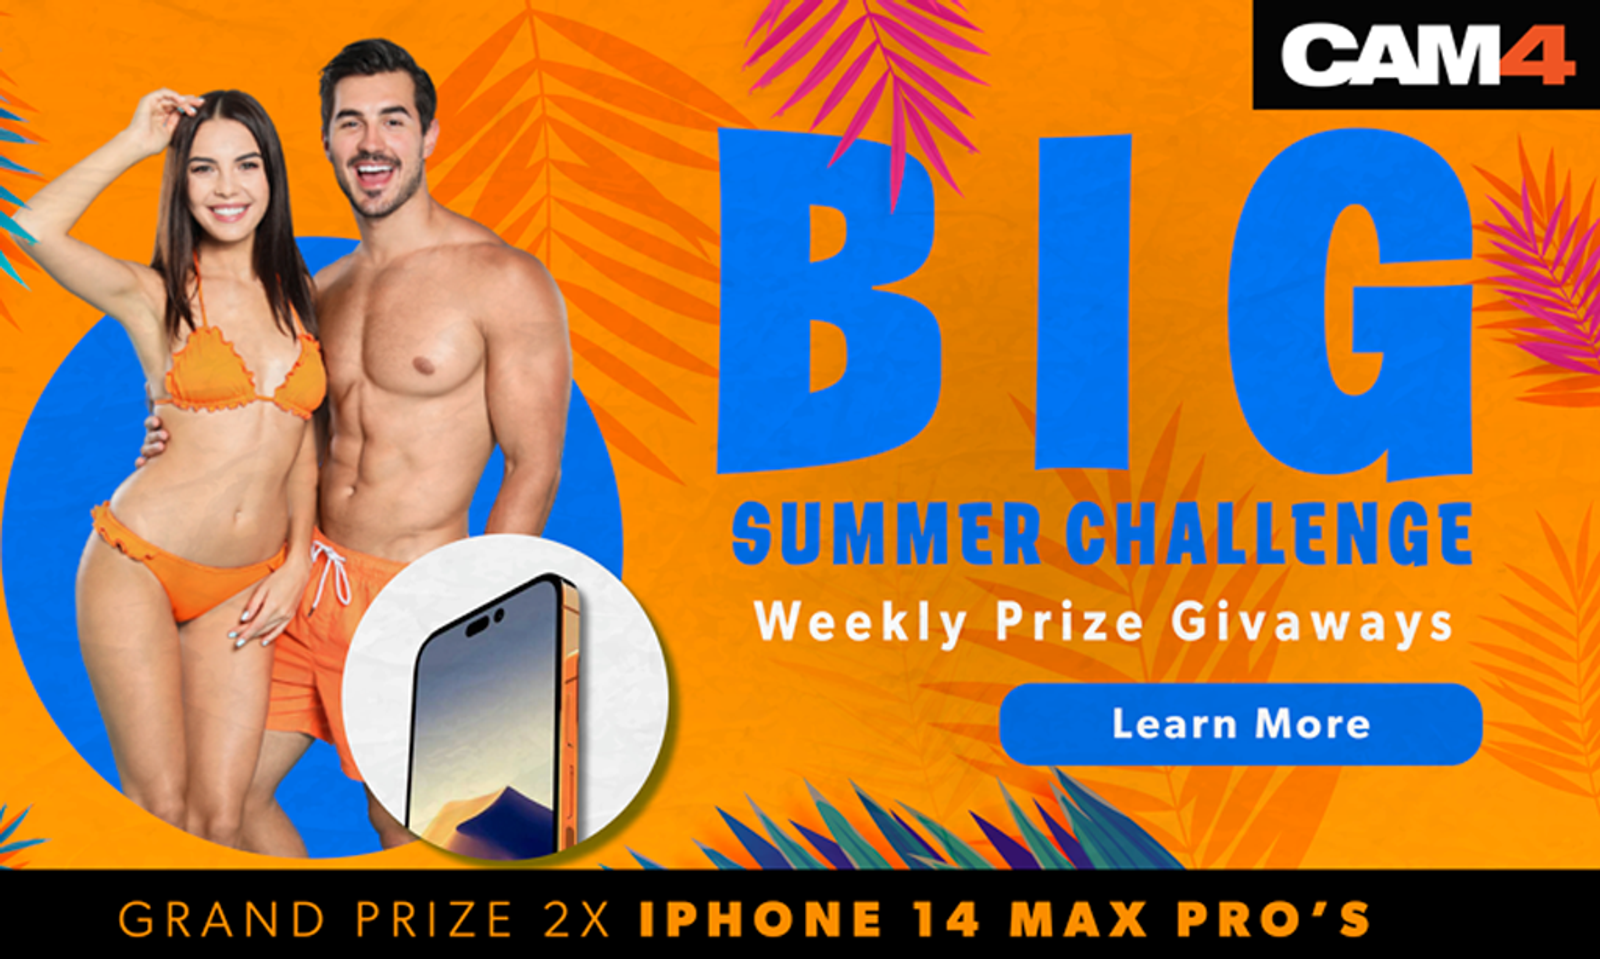 CAM4 Launches Summer Challenge With Over $5K in Prizes